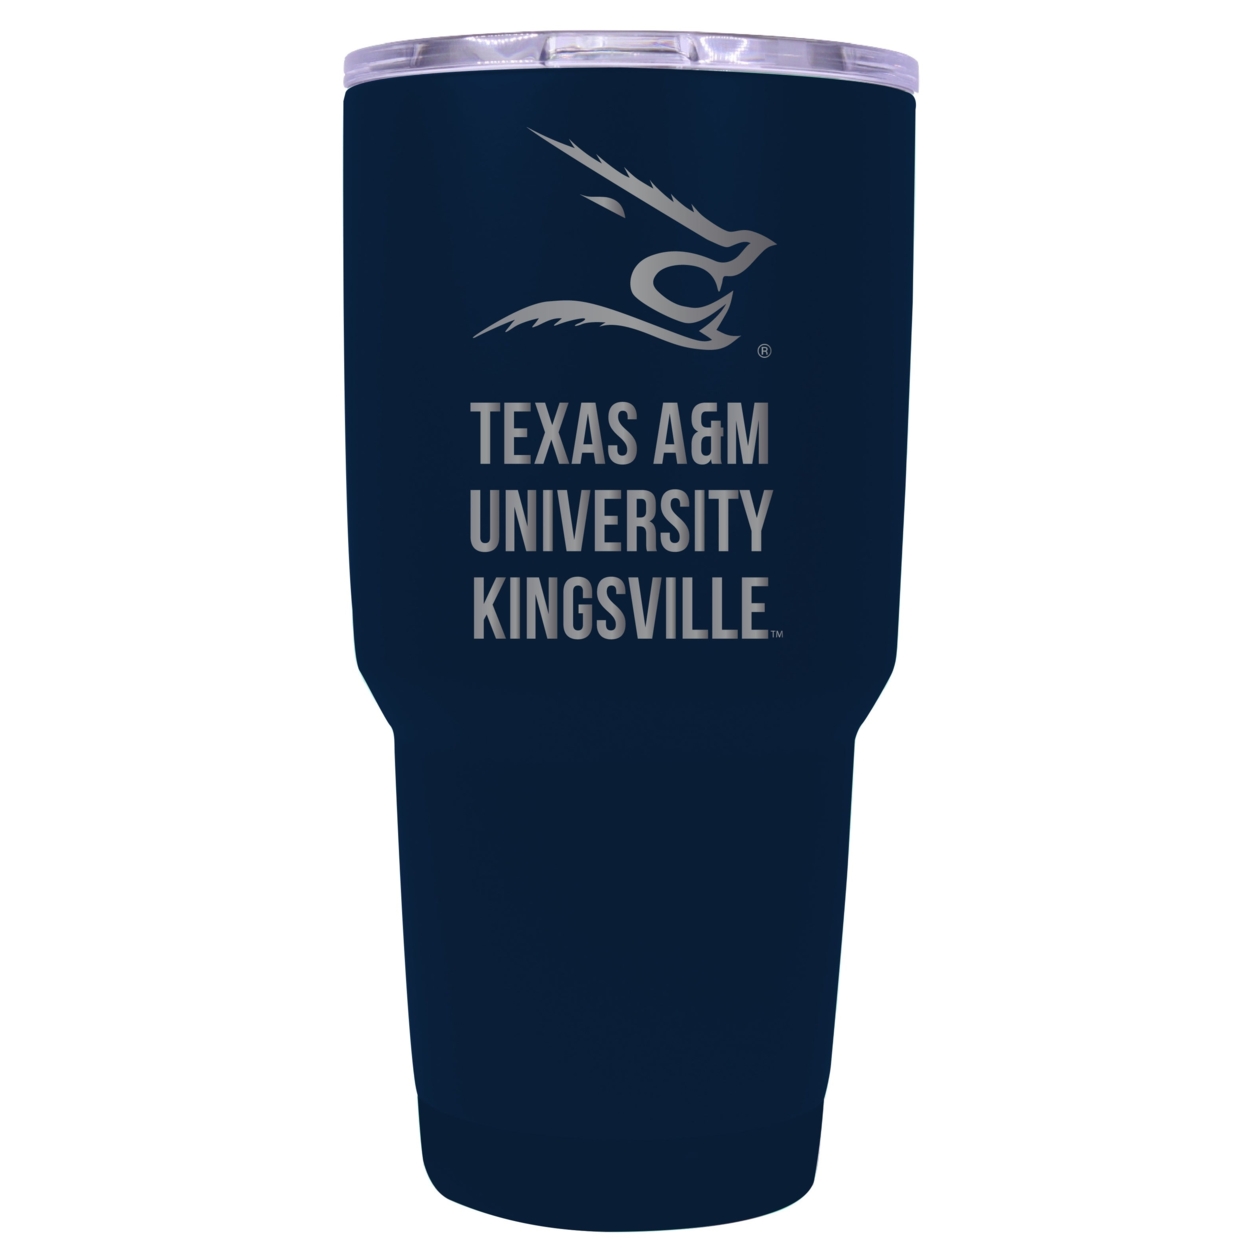 Texas A&M Kingsville Javelinas 24 Oz Laser Engraved Stainless Steel Insulated Tumbler - Choose Your Color. - Navy